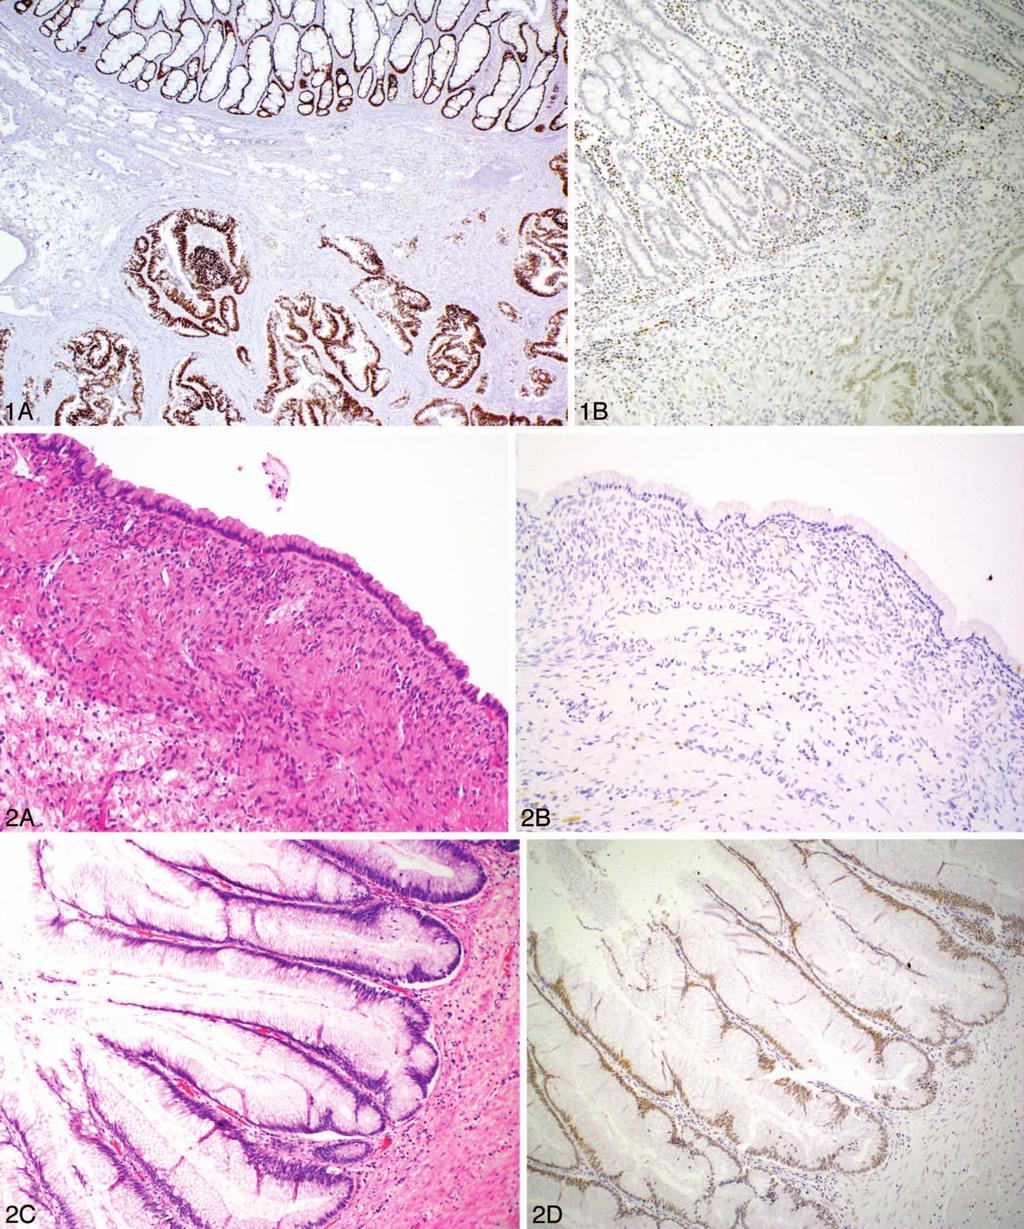 Figure 1. Strong and diffuse SATB2 expression in colorectal adenocarcinoma (A), but patchy and weak expression in small intestinal adenocarcinoma (B).